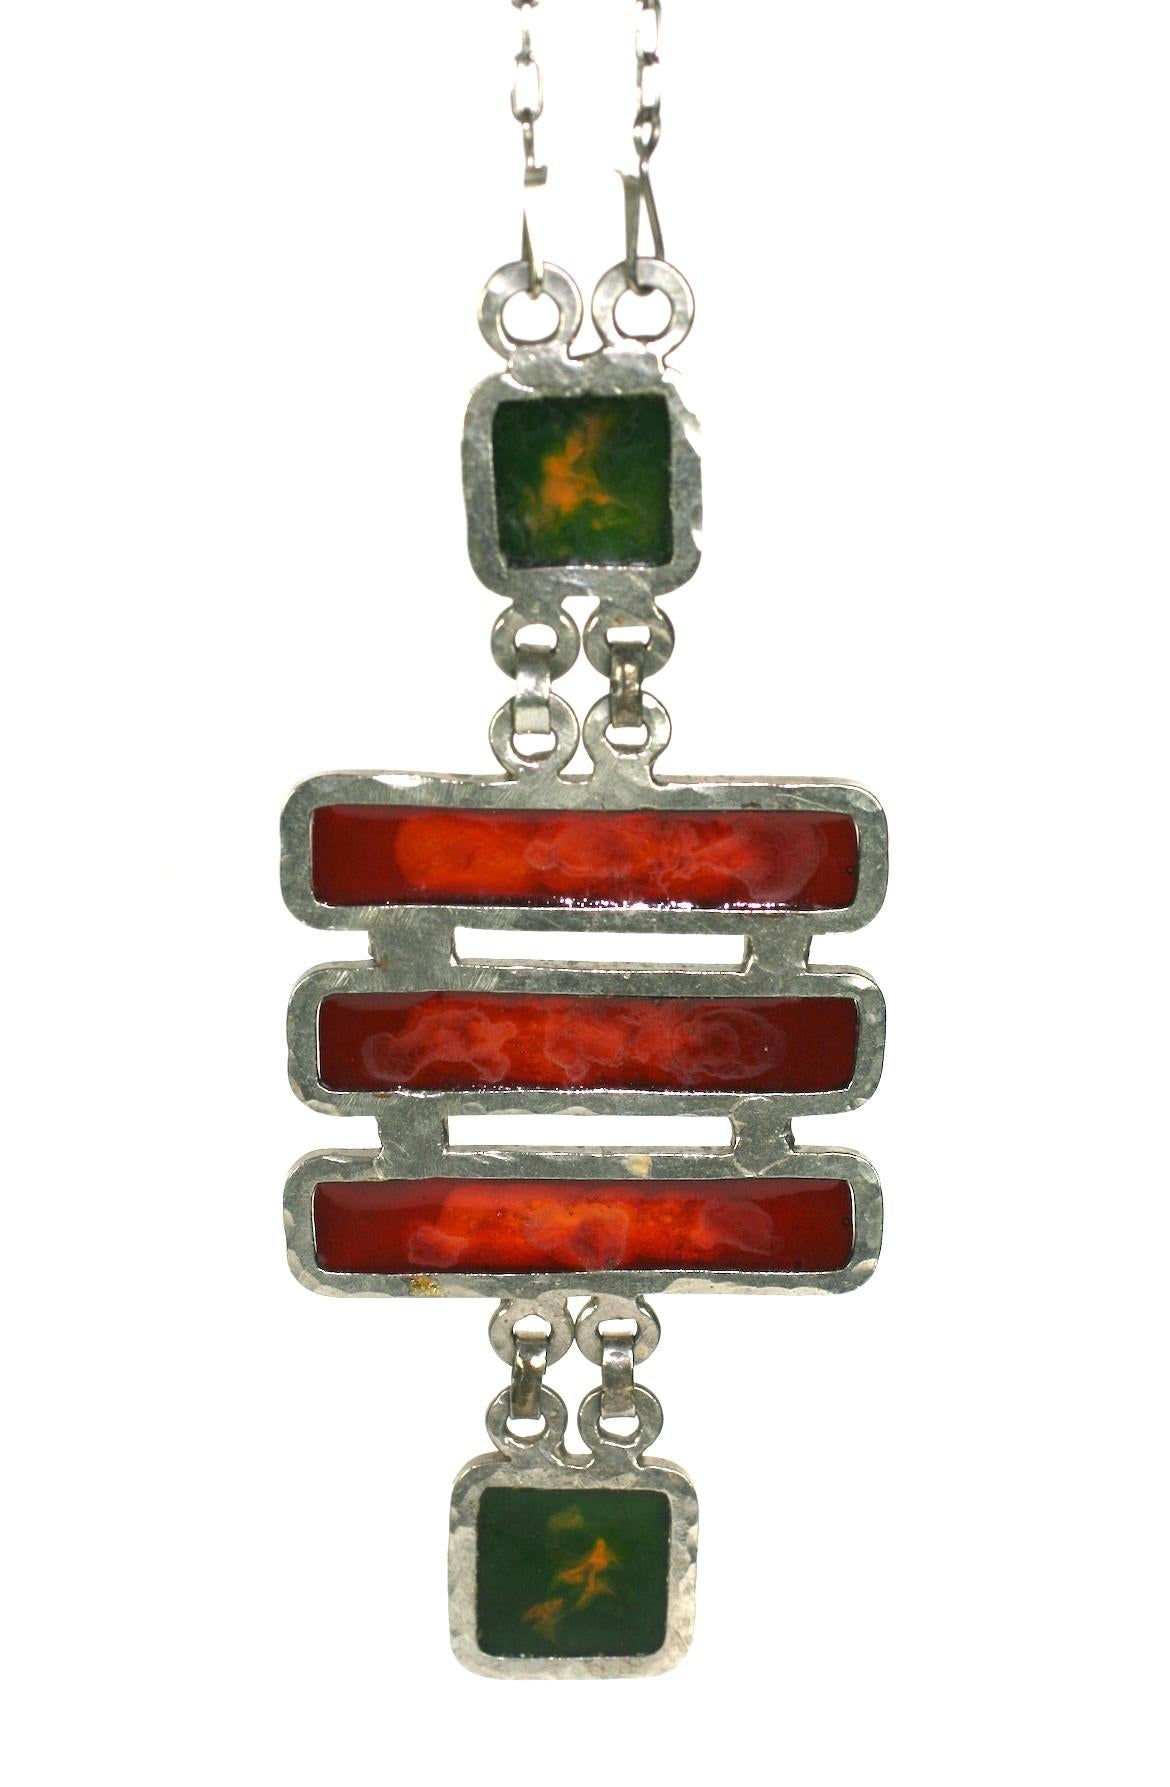 Artisanal Fused Glass Modernist Necklace from the 1960's. Hand crafted white metal bezels are used to form the wells for the molten glass for this Art Deco inspired pendant.
Unusual and striking color combinations of tortoise brown and yellow-green